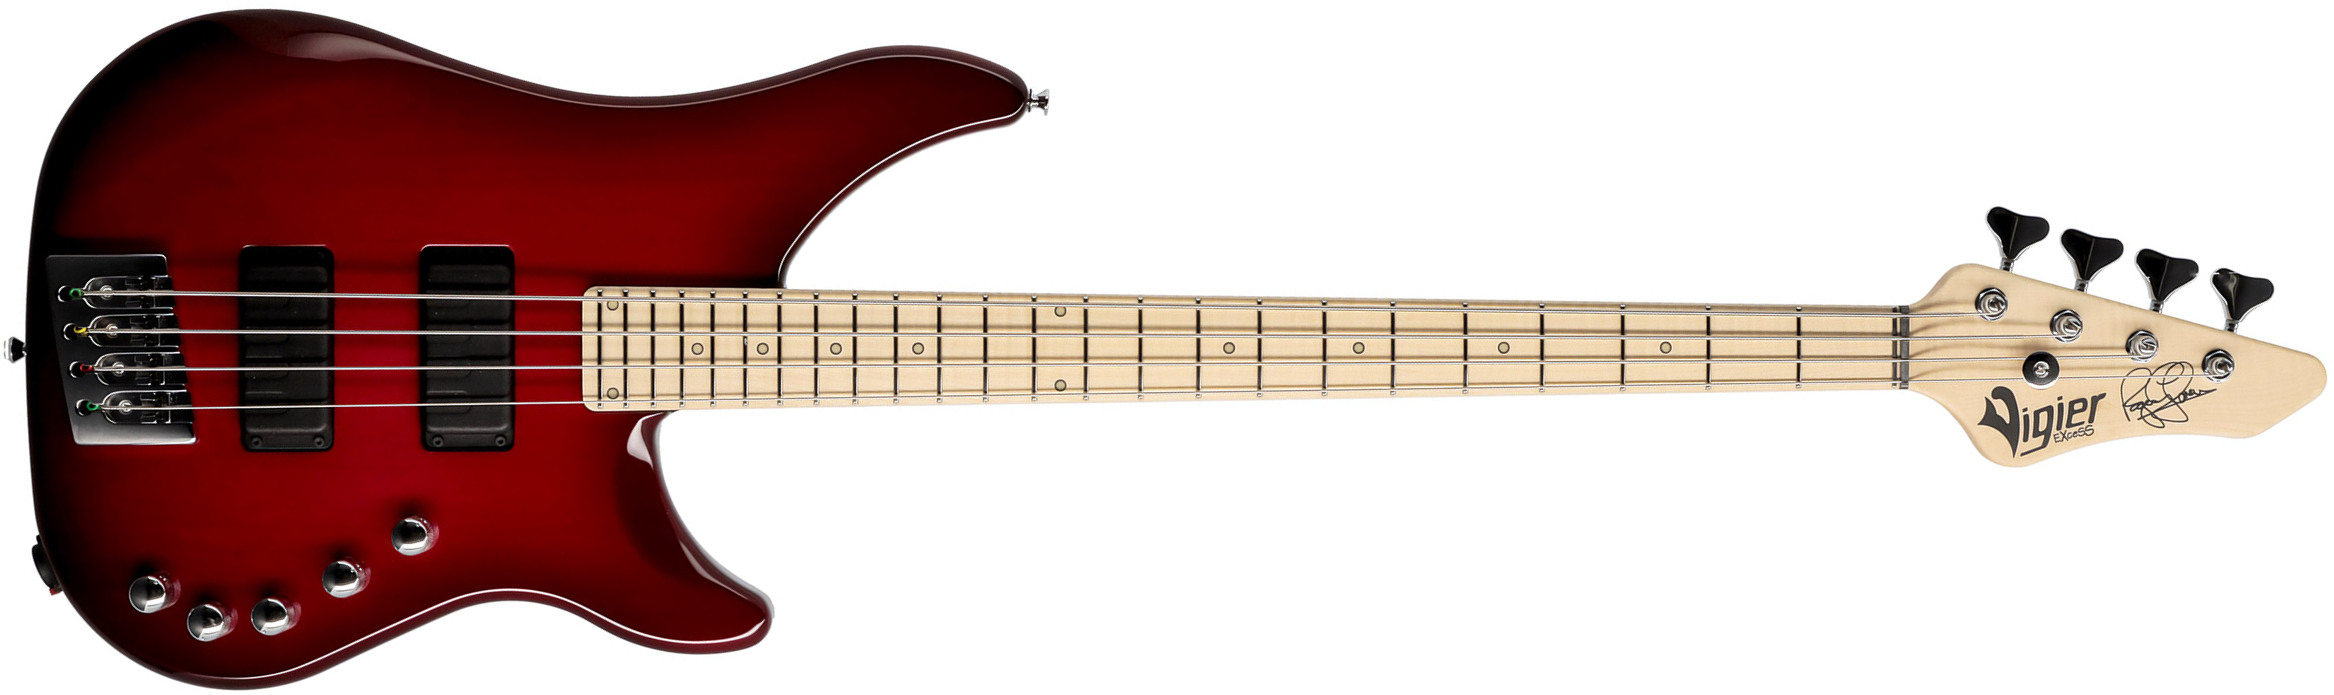 Vigier Roger Glover Excess Original Signature Active Mn - Clear Red - Solid body elektrische bas - Main picture